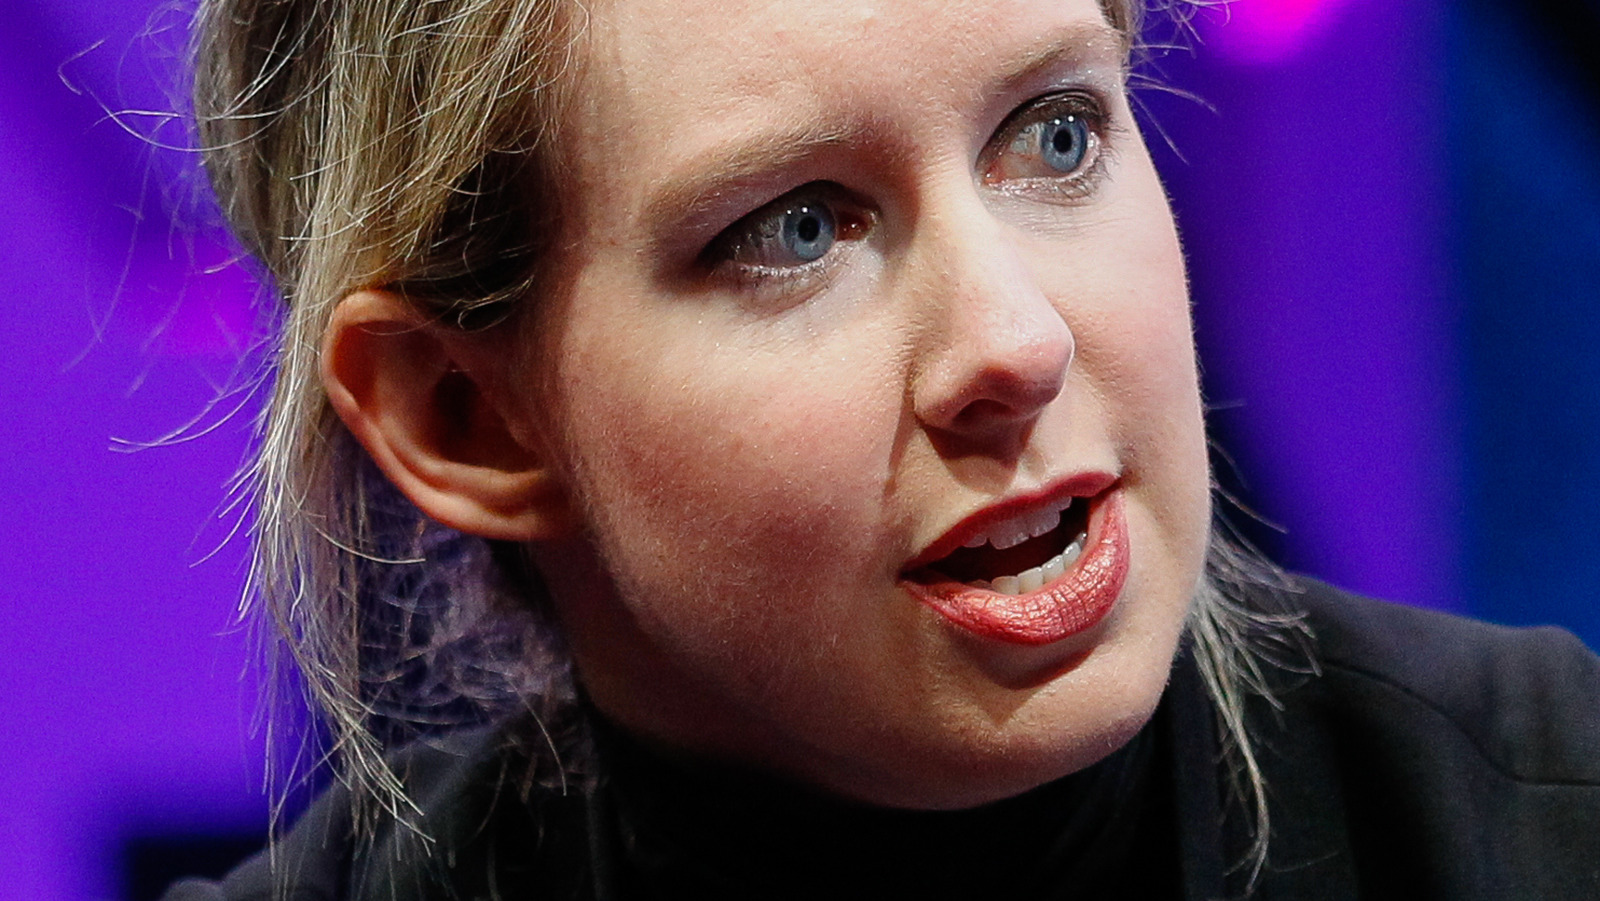 The Strange Obsession Elizabeth Holmes had with Steve Jobs